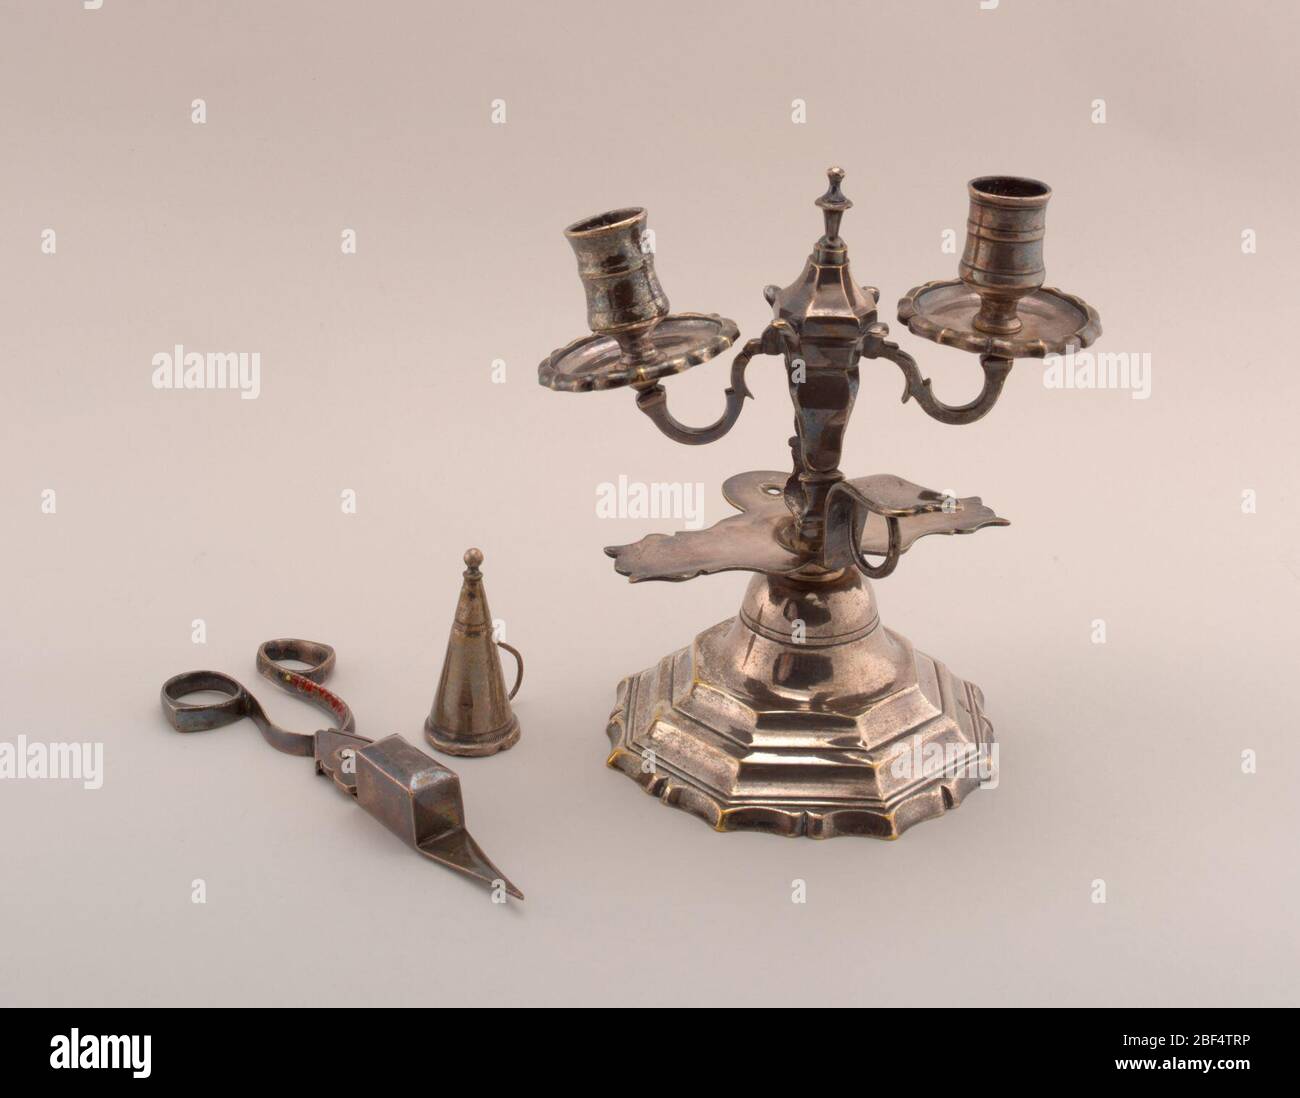 Candlestick with snuffers. Chamber candlestick with stepped base, scalloped at bottom. Two s-curve branches support ringed sockets. Finial at center. Ring handle with thumb rest. Candle snuffer is a small hollow cone with ball finial. Stock Photo